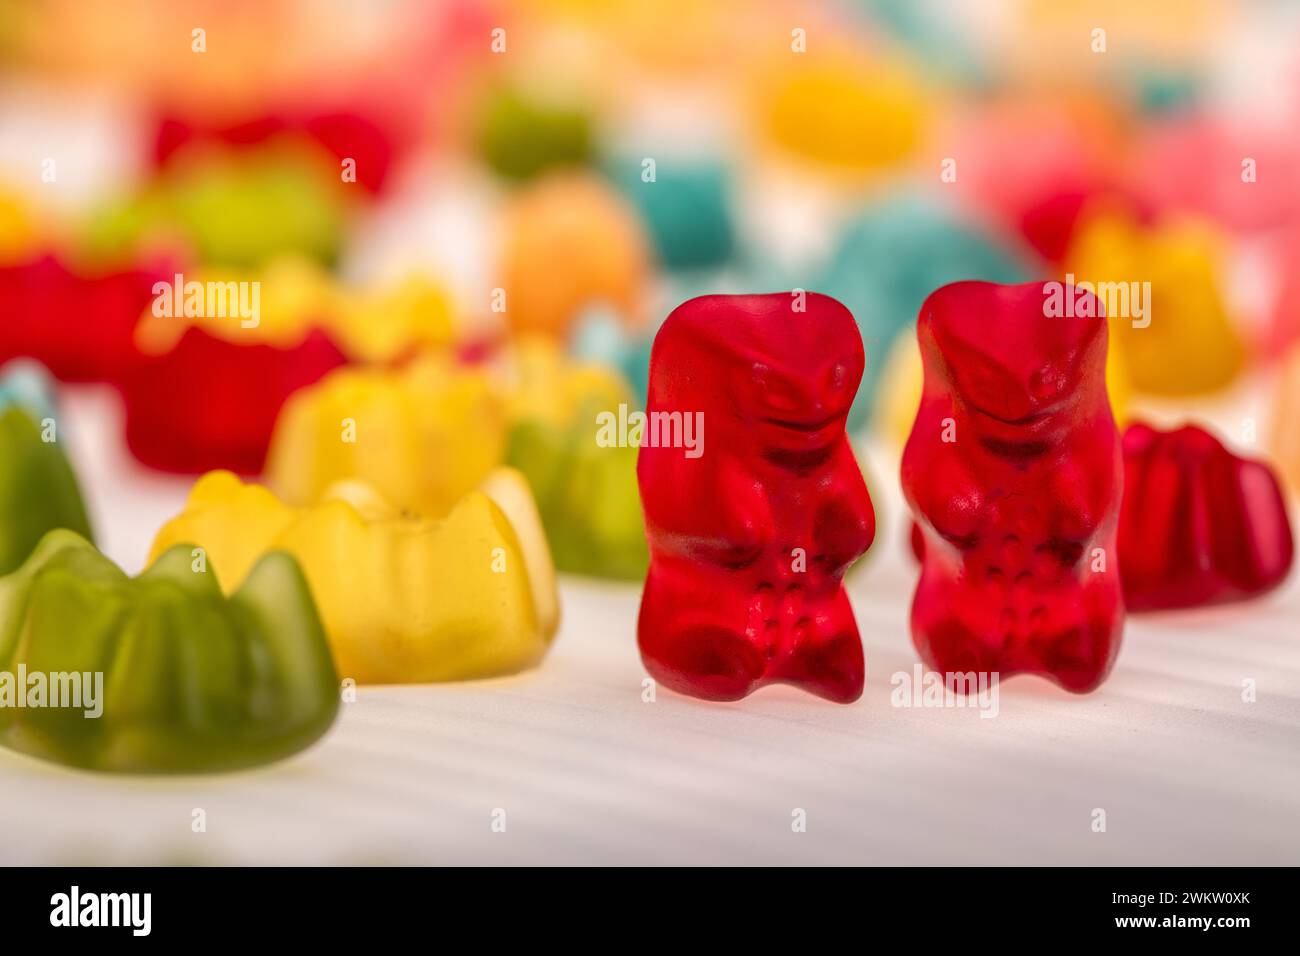 Sweet Friendship: Two Red Gummy Bears Bonding on Colorful Background, Friendship Talk Stock Photo